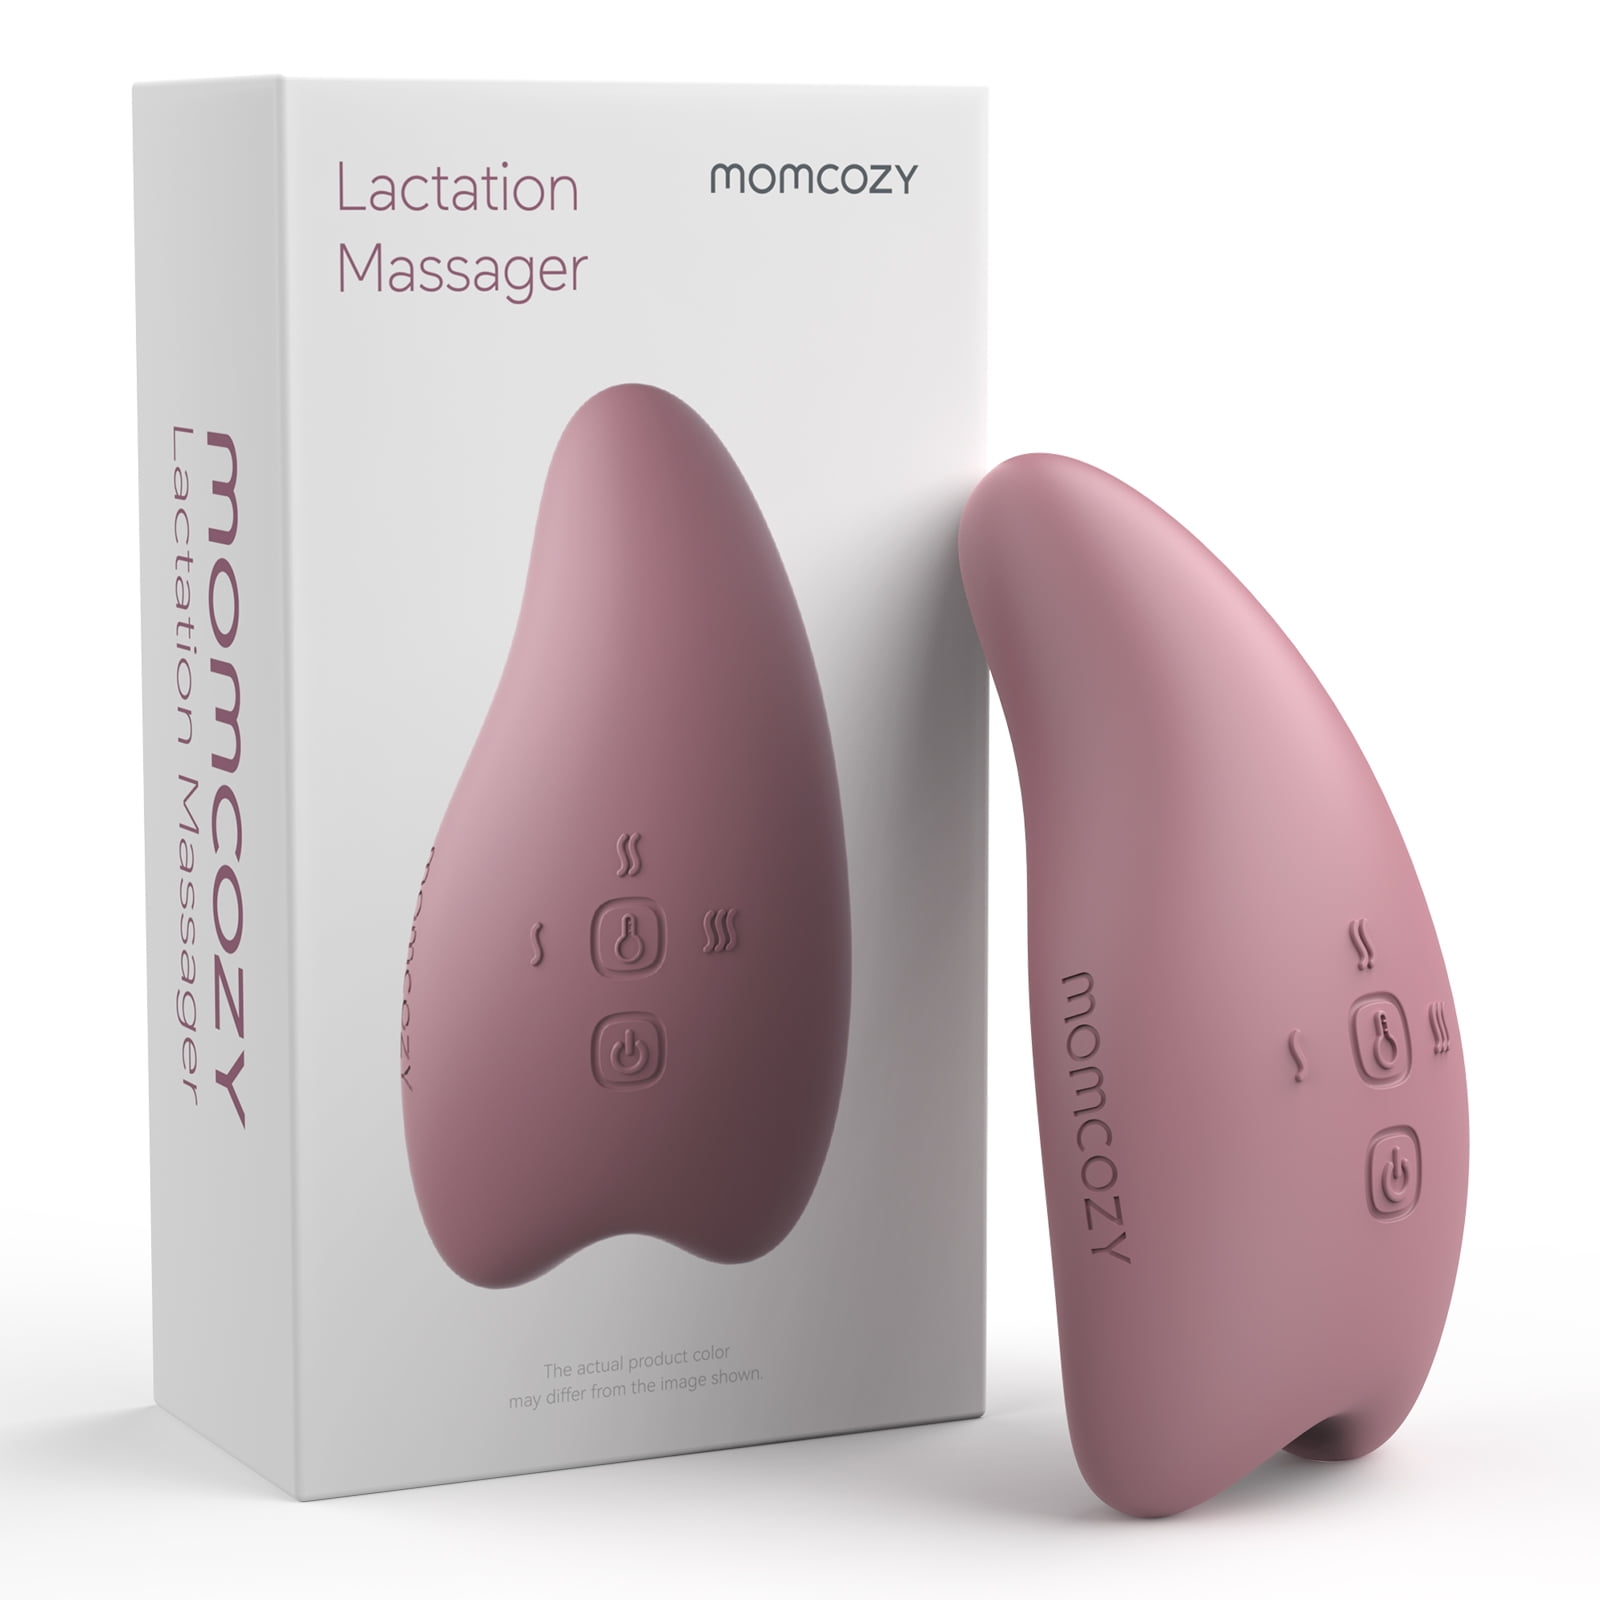  Momcozy Warming Lactation Massager 2-in-1, Soft Breast Massager  for Breastfeeding, Heat + Vibration Adjustable for Clogged Ducts, Improve  Milk Flow, Lilac : Baby